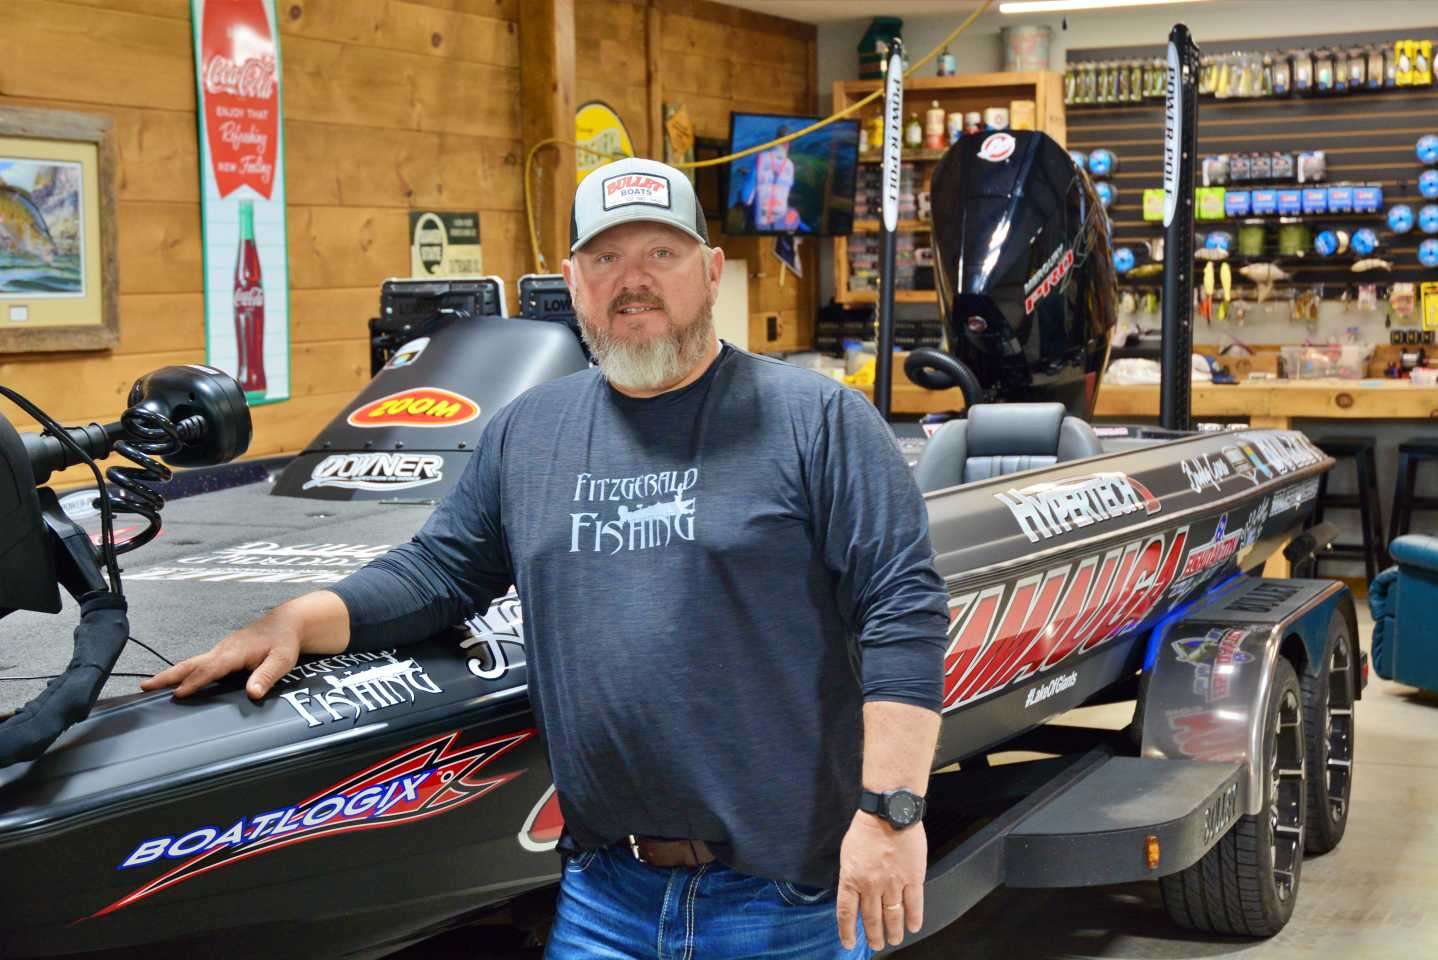 Gross is competing in his second season on the Bassmaster Elite Series. Already, heâs won an event â the 2020 Bassmaster Elite Series event at Lake Eufaula.  